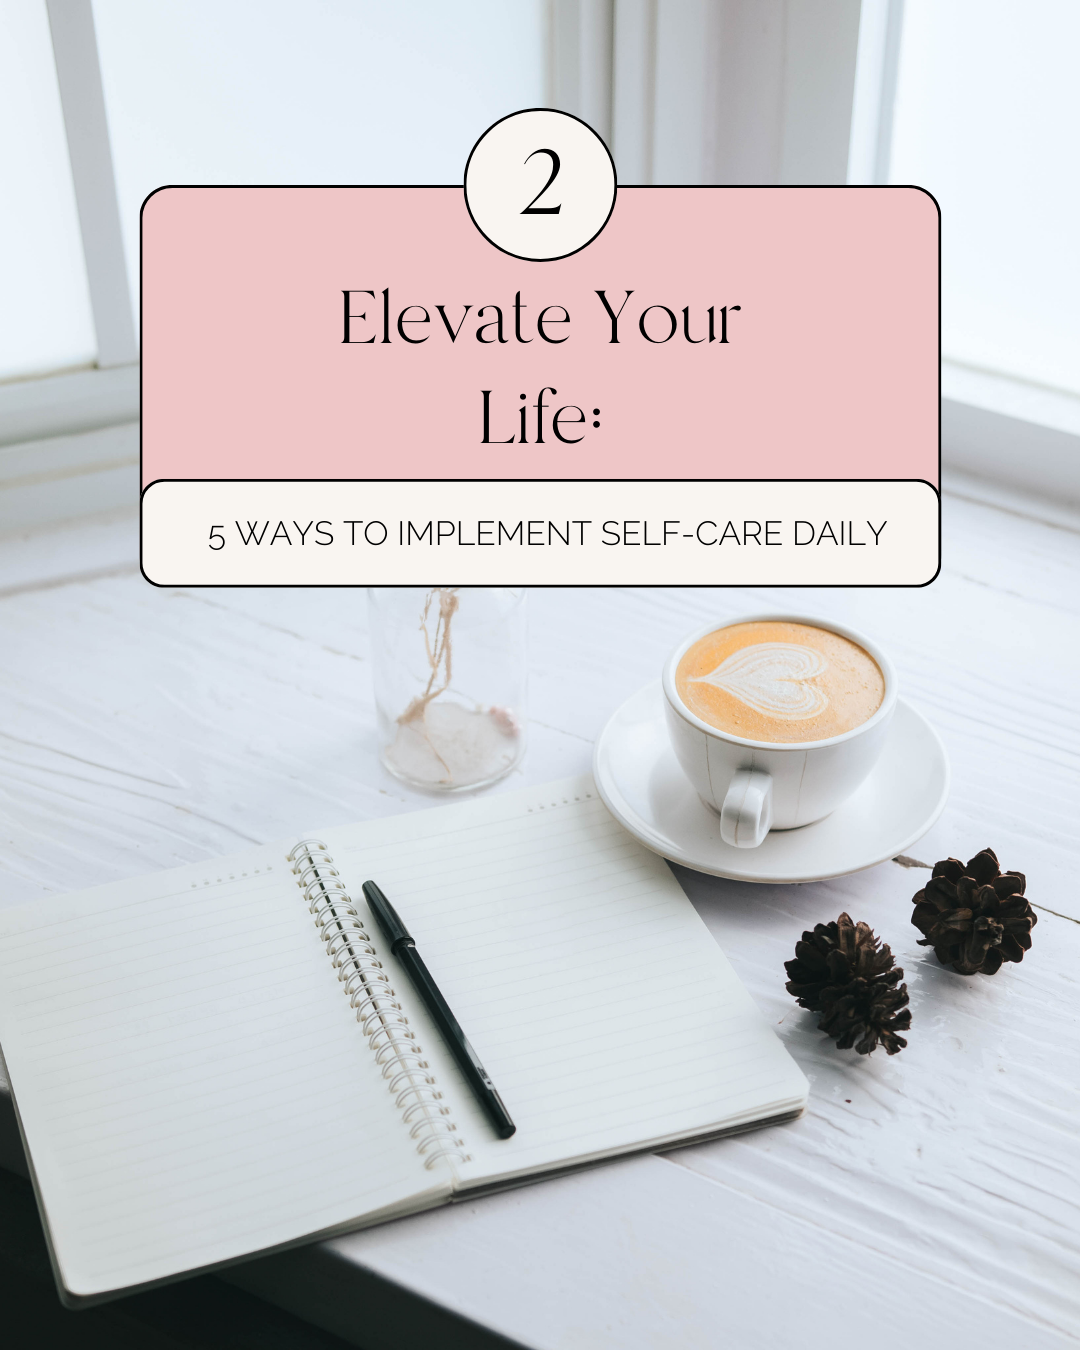 Elevate Your Life: 5 Ways Self-Care Boosts Your Mind, Body, and Spirit